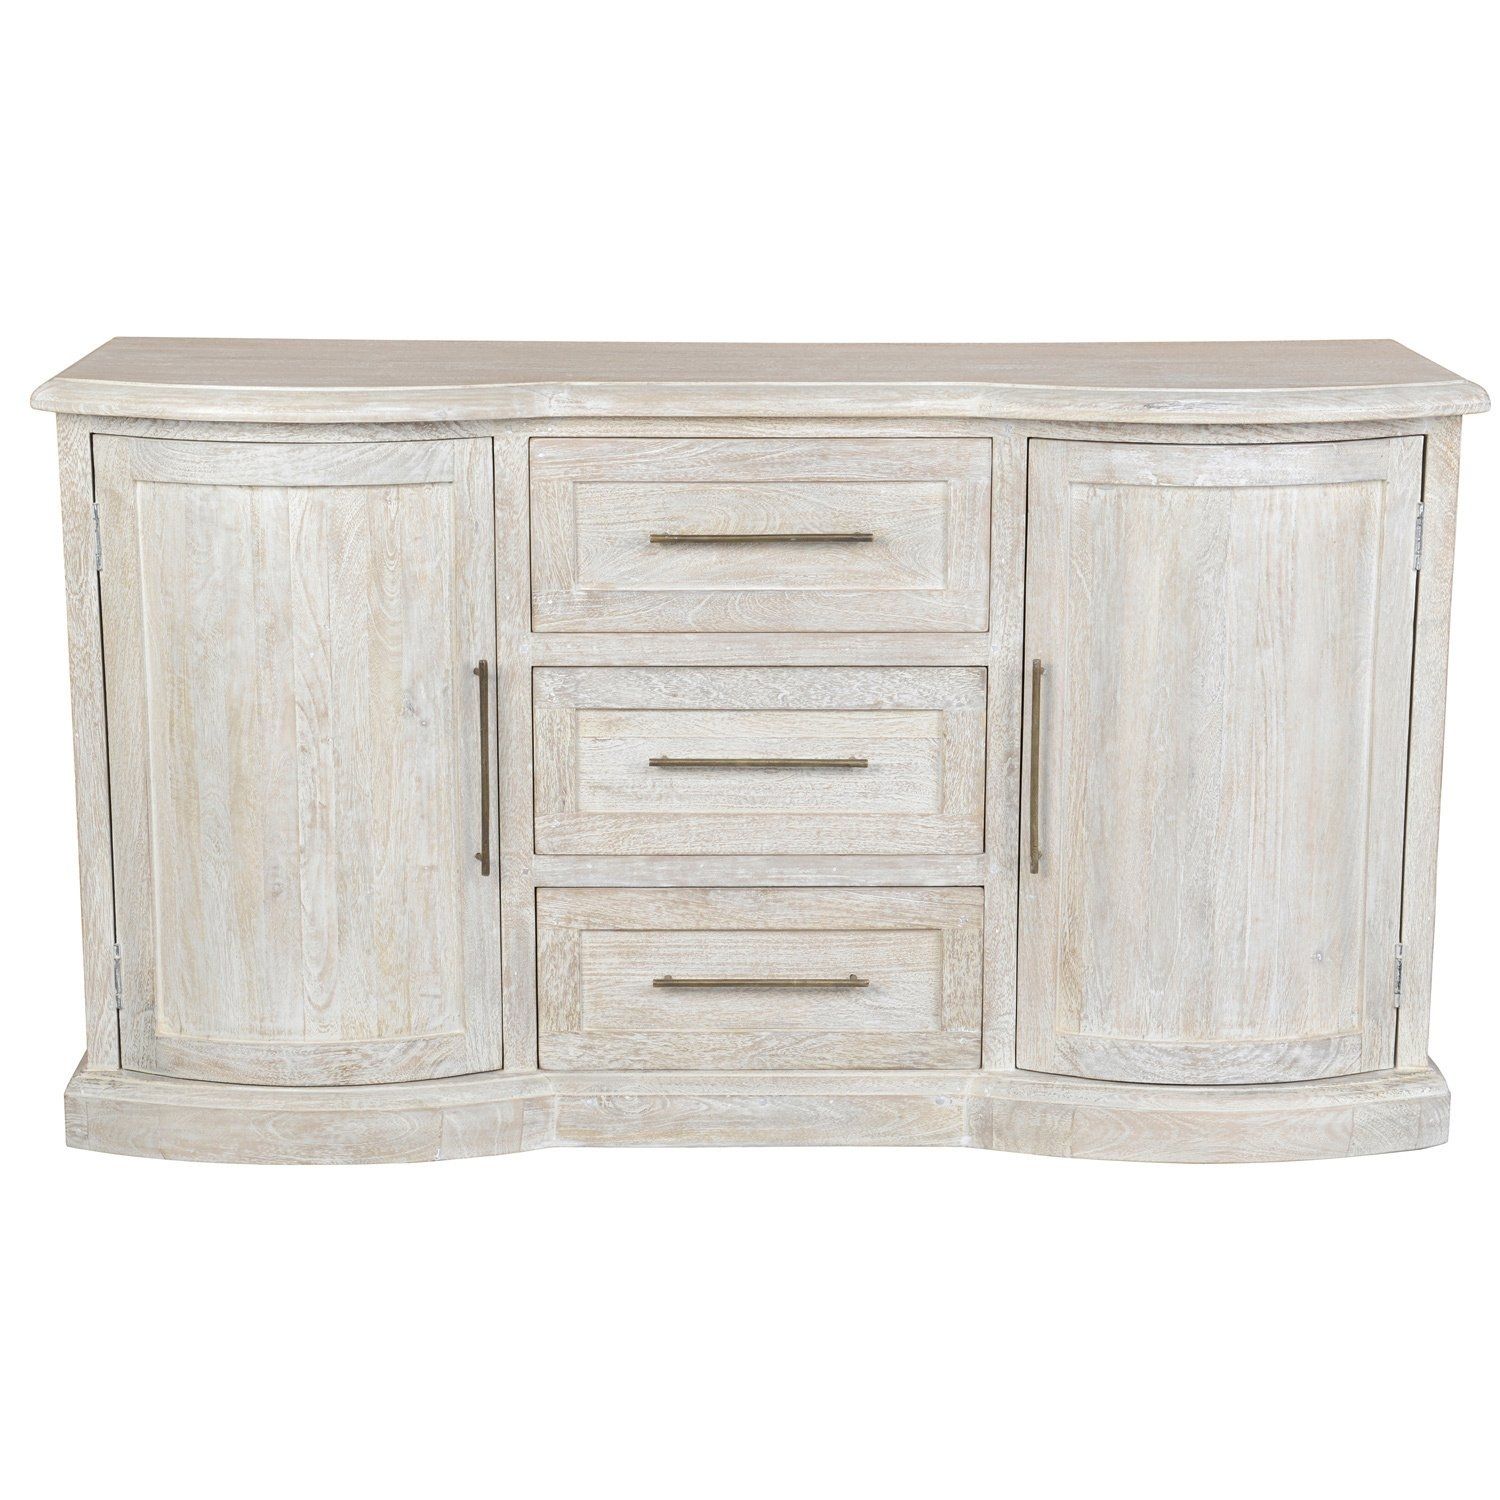 Shop Norman Antique White Sideboardkosas Home – Free Shipping With Natural Oak Wood 78 Inch Sideboards (View 17 of 30)